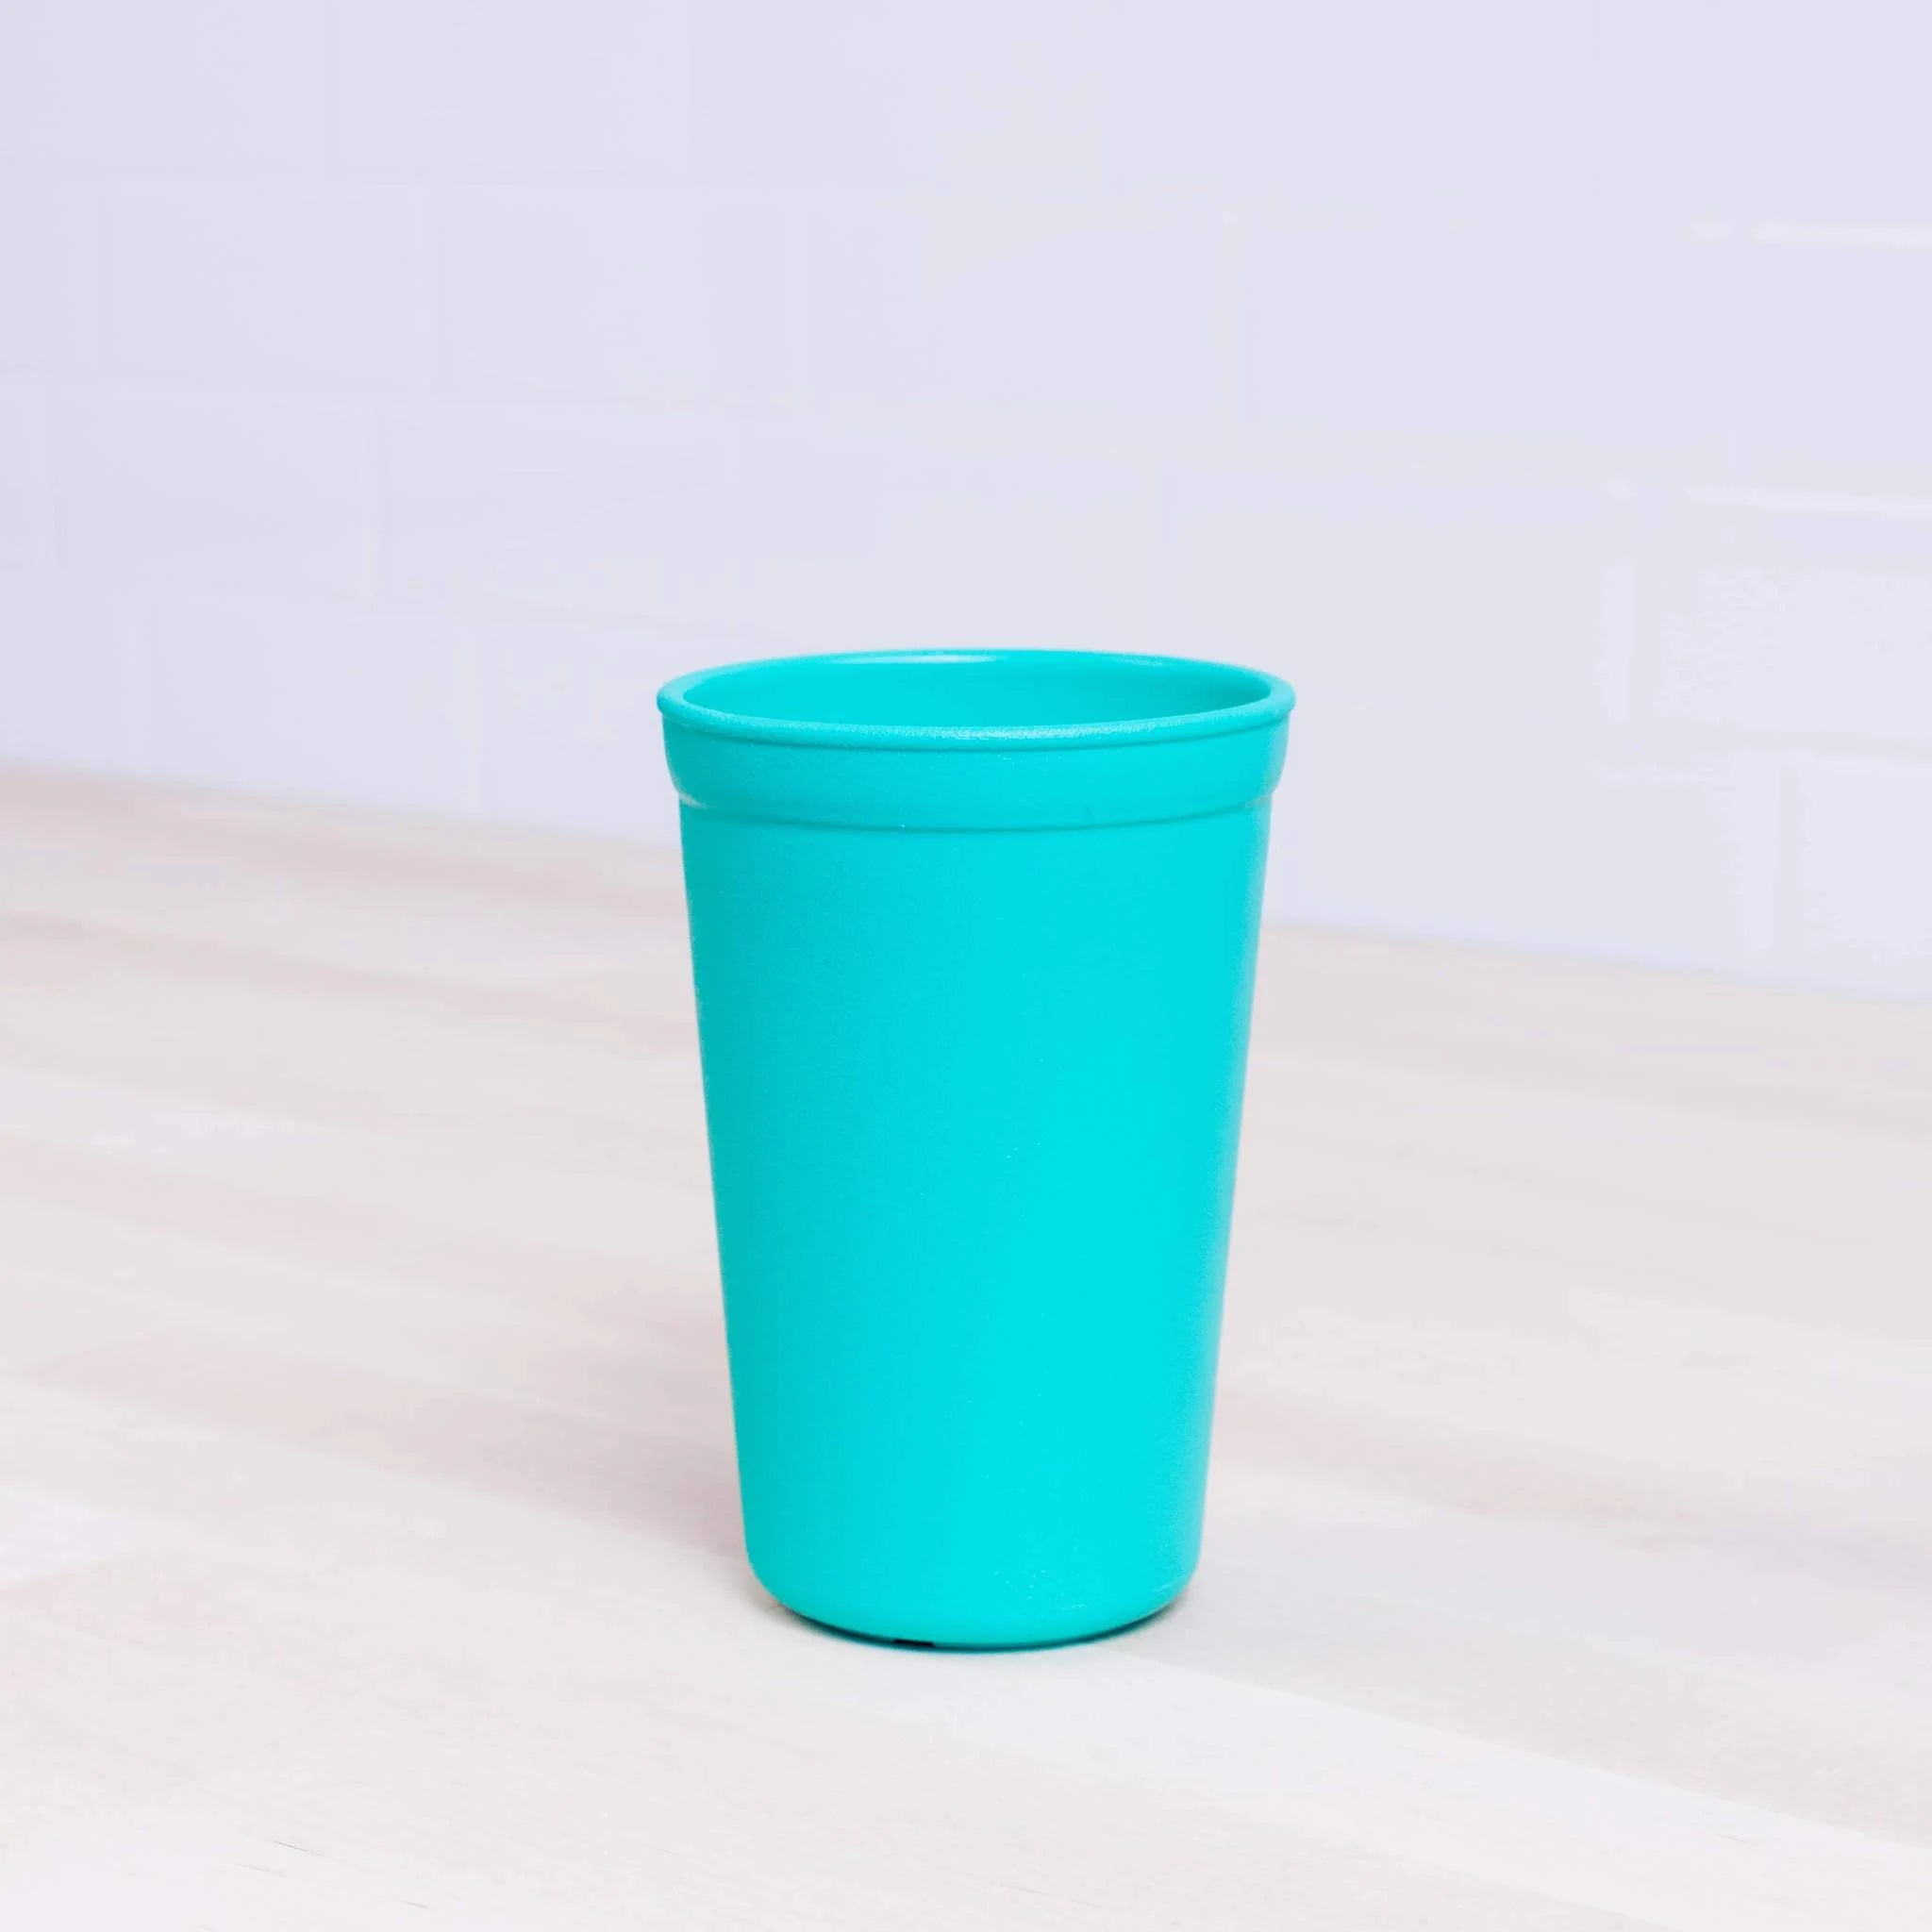 Re-Play - Packaged Drinking Cups - Pack of 3 (True Blue)